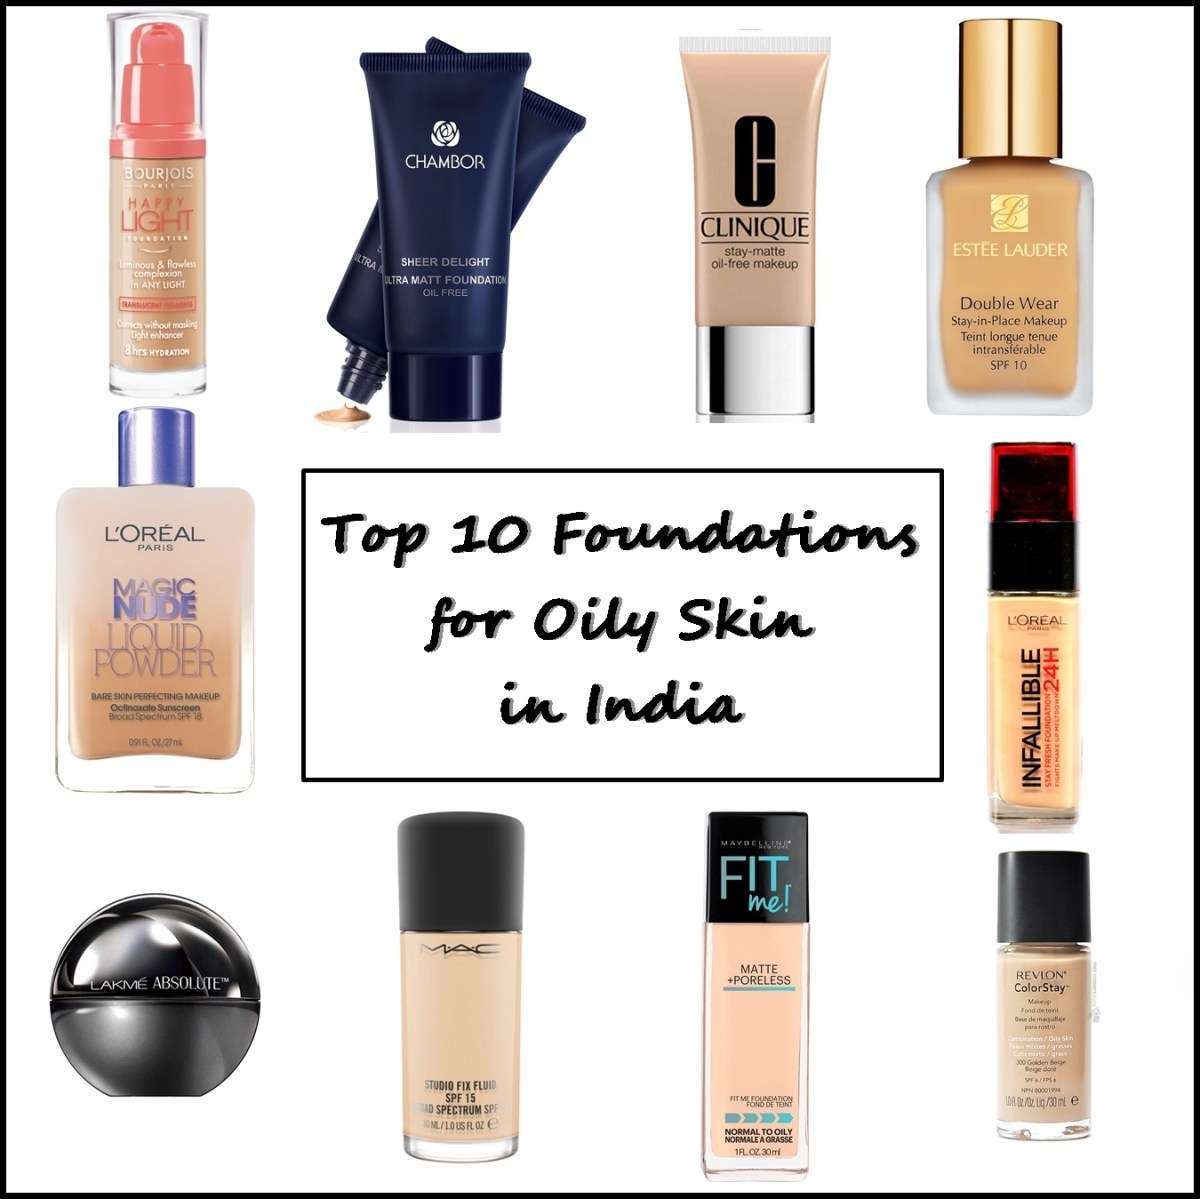 Top 10 Foundations for Oily Skin in India, Prices, Buy Online